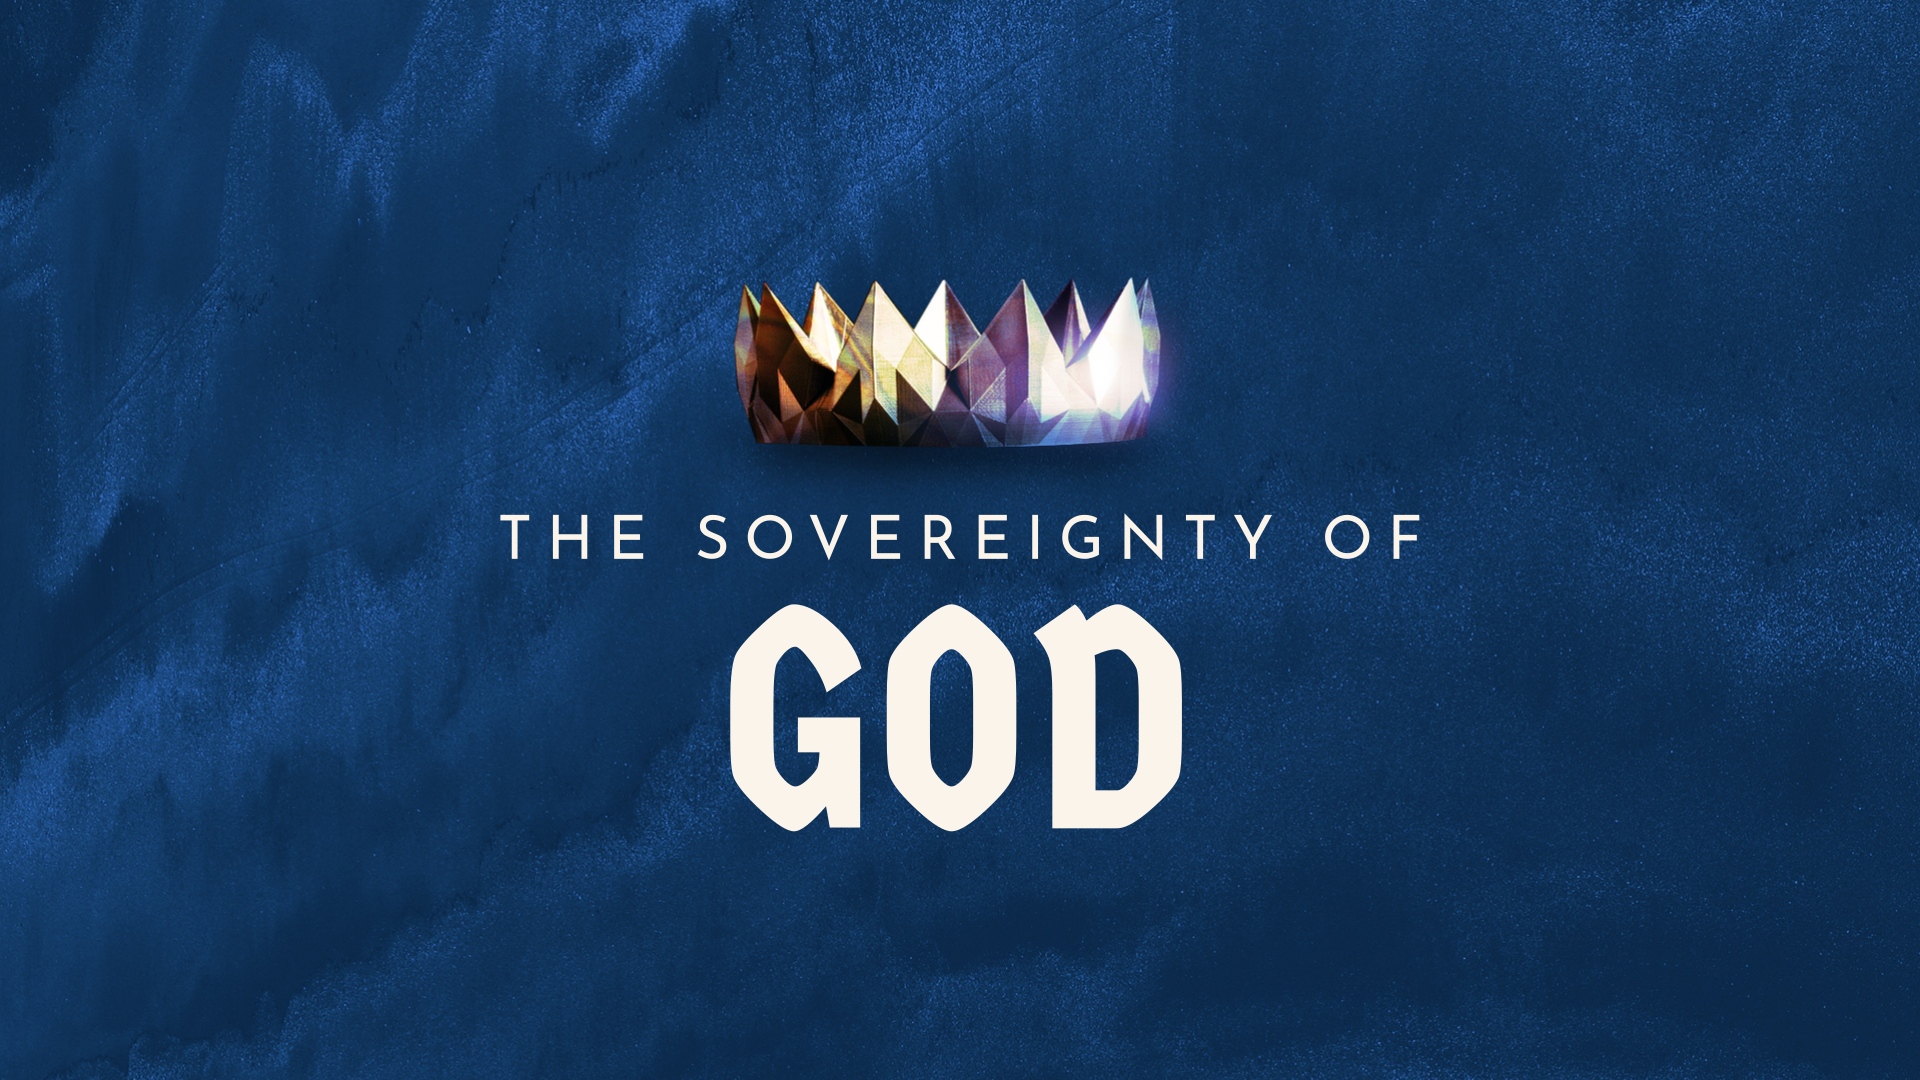 His Sovereignty